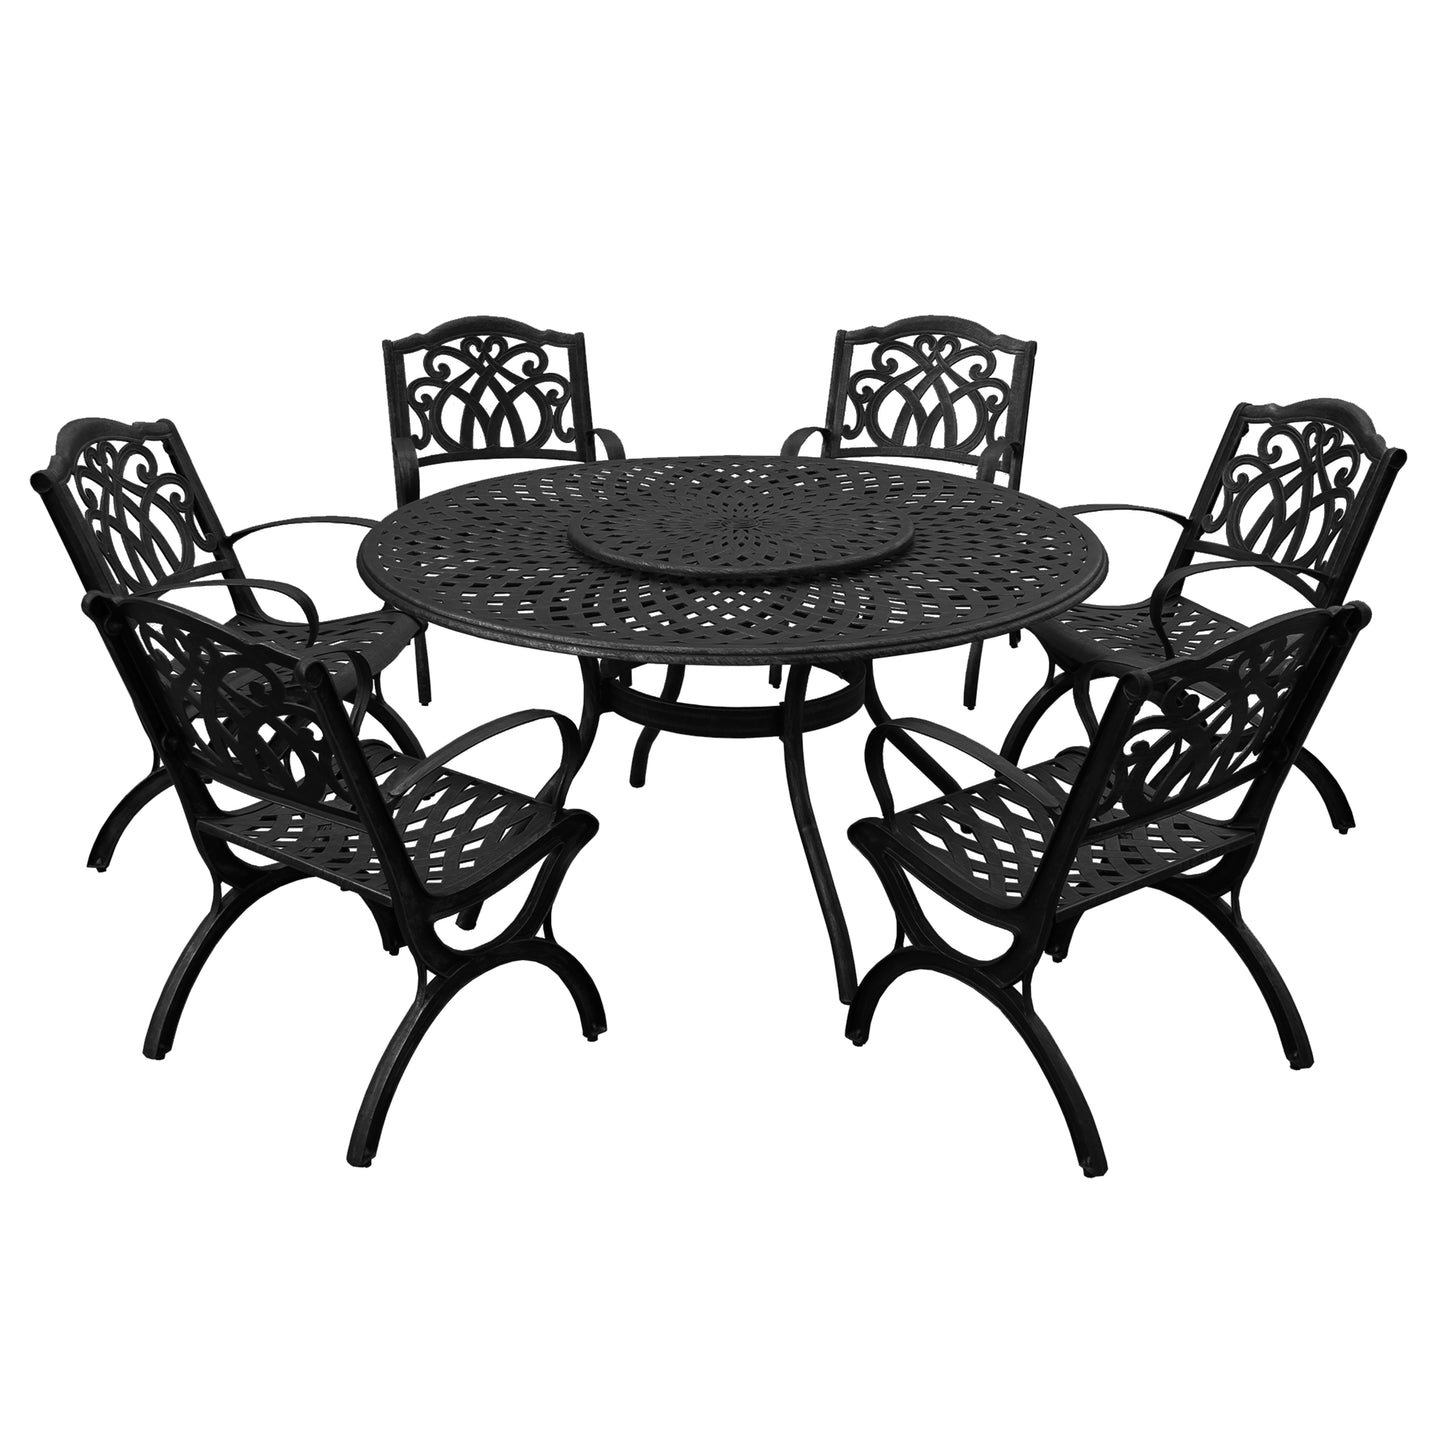 Outdoor Aluminum 7pc Round Patio Dining Set, Lazy Susan, Six Chairs